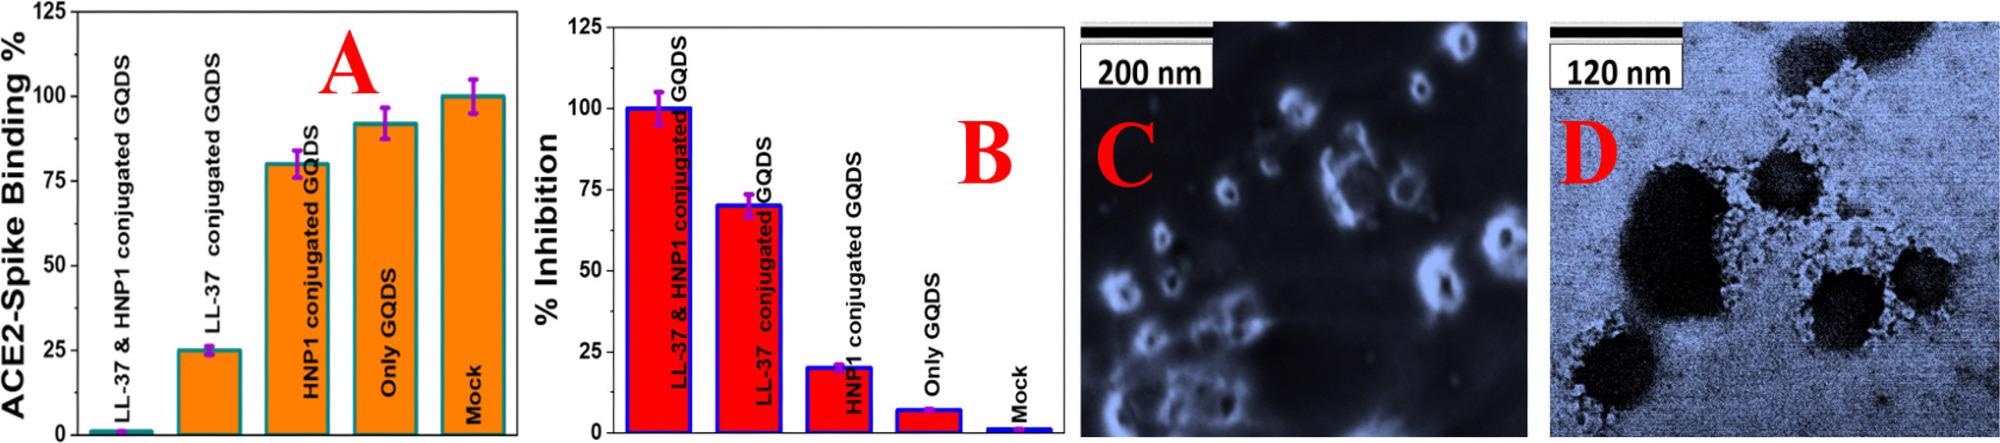 (A) Interaction of Baculovirus pseudotyped with a SARS-CoV-2 delta variant (B.1.617.2) spike protein and ACE2 on HEK-293T cells, measured using fluorescence imaging. (B) Inhibition efficiency of Baculovirus pseudotyped with the delta variant spike protein in infected HEK293T cells in the presence of buffer (Mock), GQDs (30 µg/mL), HNP1 (4 µg/mL)-attached GQDs (30 µg/mL), LL-37 (4 µg/mL)-attached GQDs (30 µg/mL), and LL-37 (4 µg/mL) and HNP1 (4 µg/mL)-attached GQDs (30 µg/mL). (C) SEM image of Baculovirus pseudotyped with a SARS-CoV-2 delta variant (B.1.617.2) spike protein when they are treated with peptide-attached GQDs for 6 h. (D) TEM image of Baculovirus pseudotyped with a SARS-CoV-2 delta variant (B.1.617.2) spike protein when they are treated with peptide-attached GQDs for 12 h.